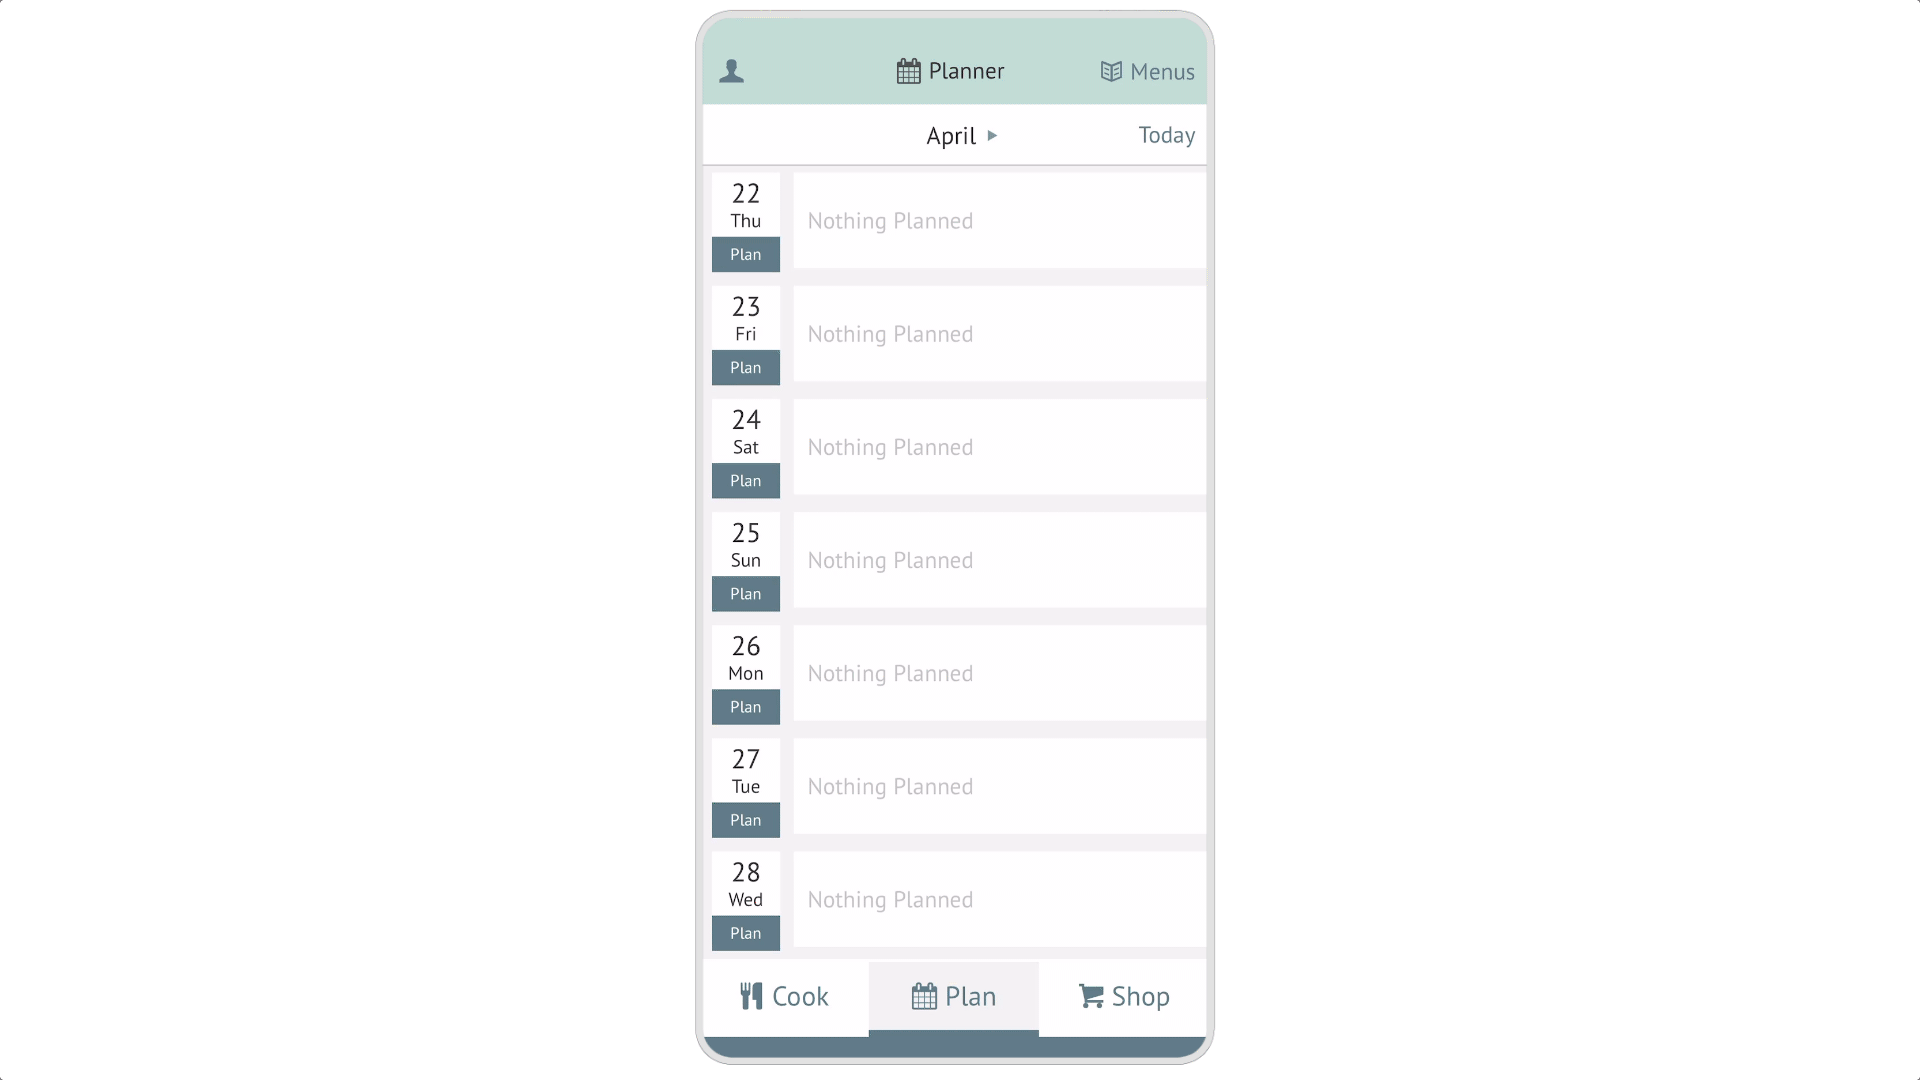 Animated gif showing how to access the Plan to Eat Menus feature on the app